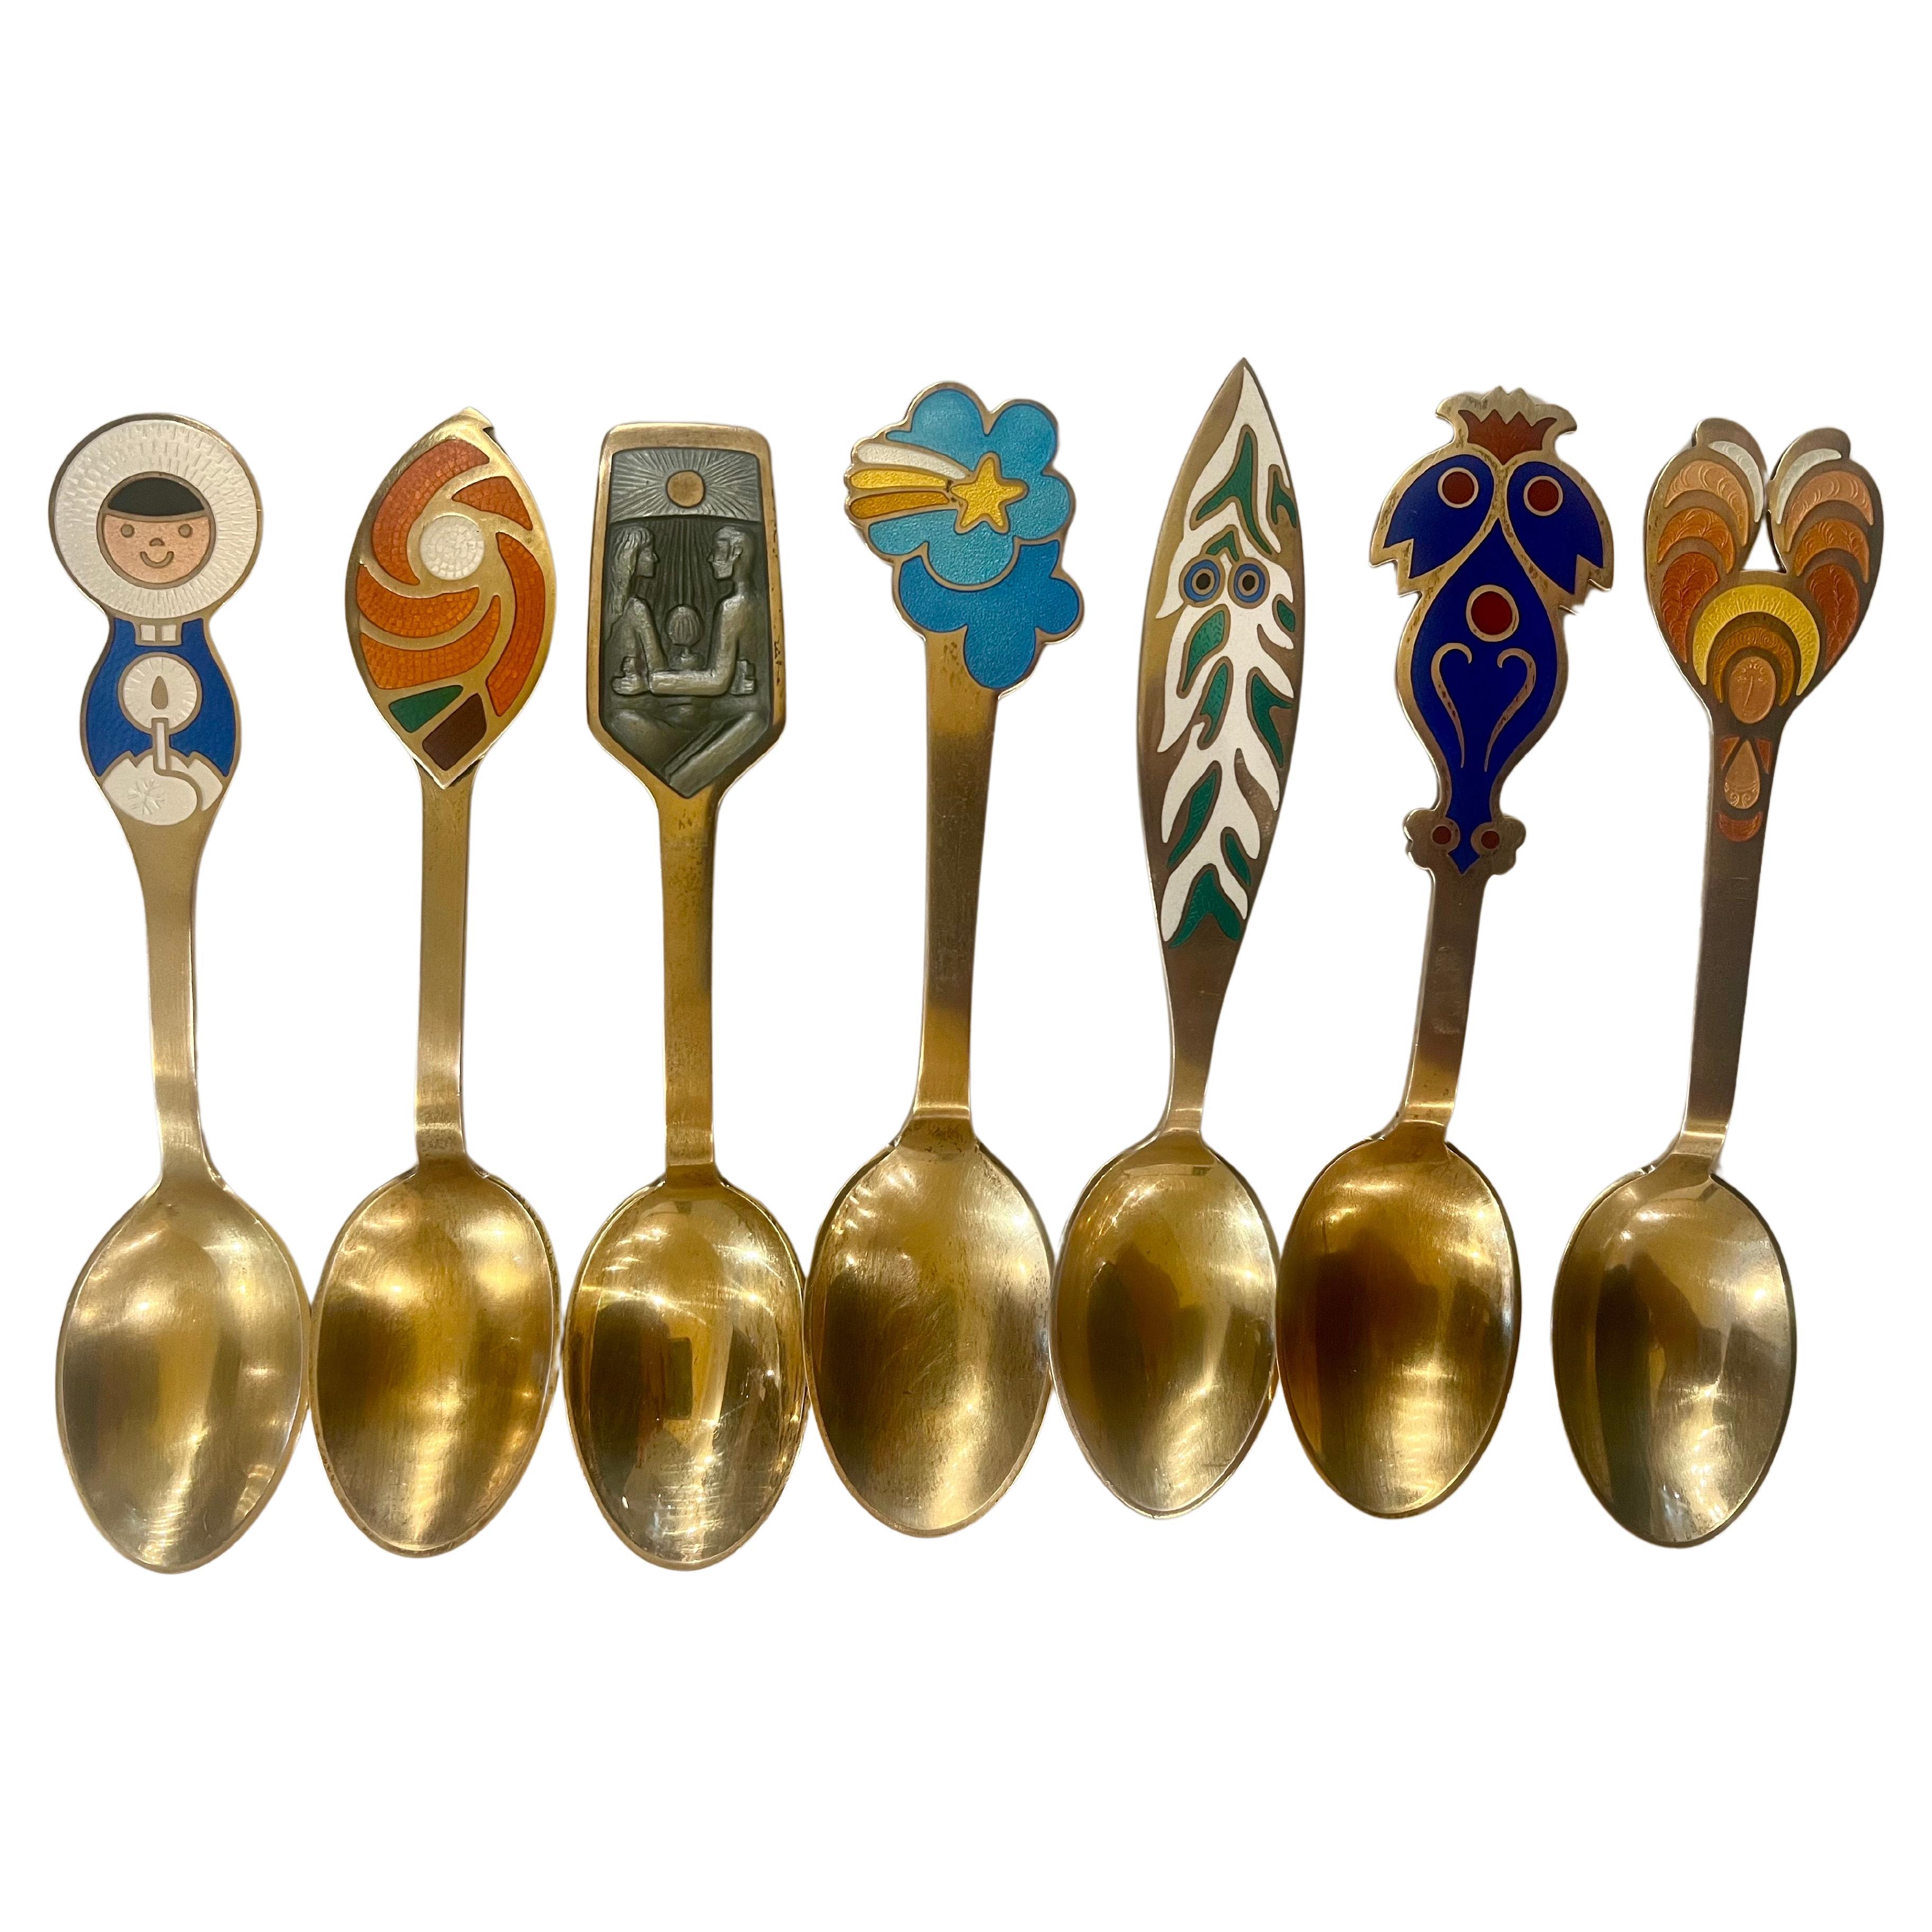 Enameled sterling Silver Collection of 7 Spoons By Bjorn Wiinblad Danish Modern In Excellent Condition For Sale In San Diego, CA